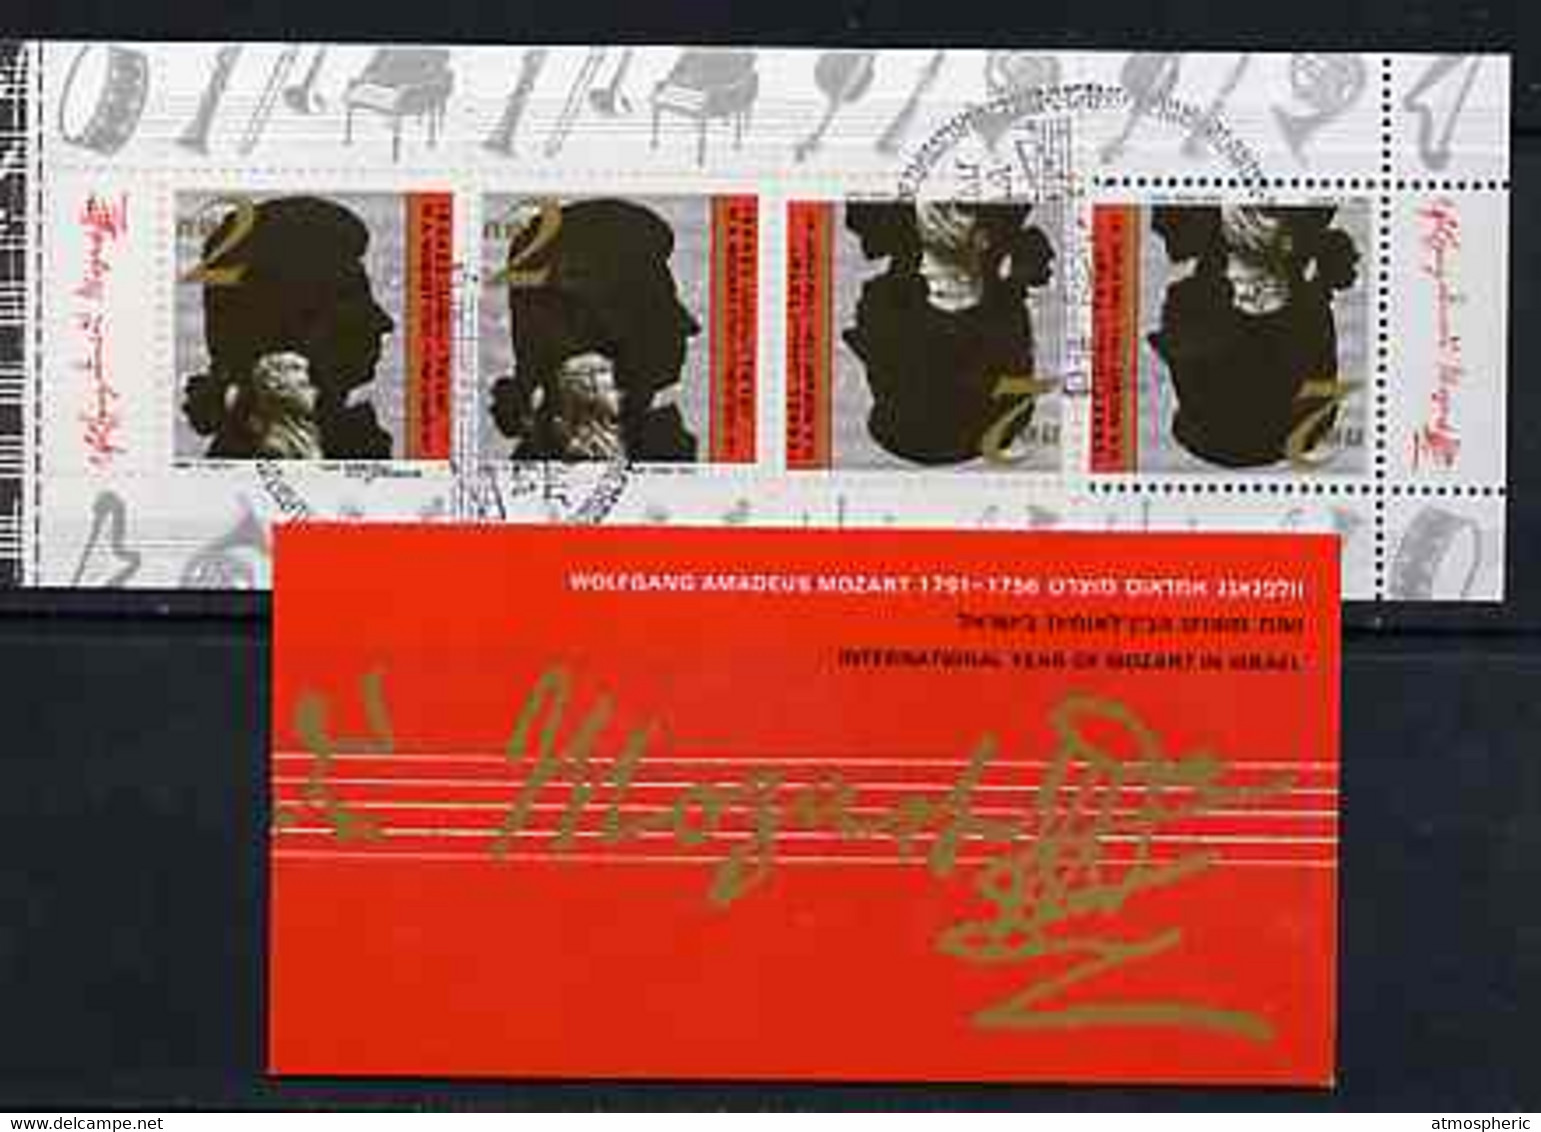 Booklet - Israel 1991 Mozart 8s Booklet (tete-beche Pane) Complete With First Day Commemorative Cancels, SG SB22 - Markenheftchen